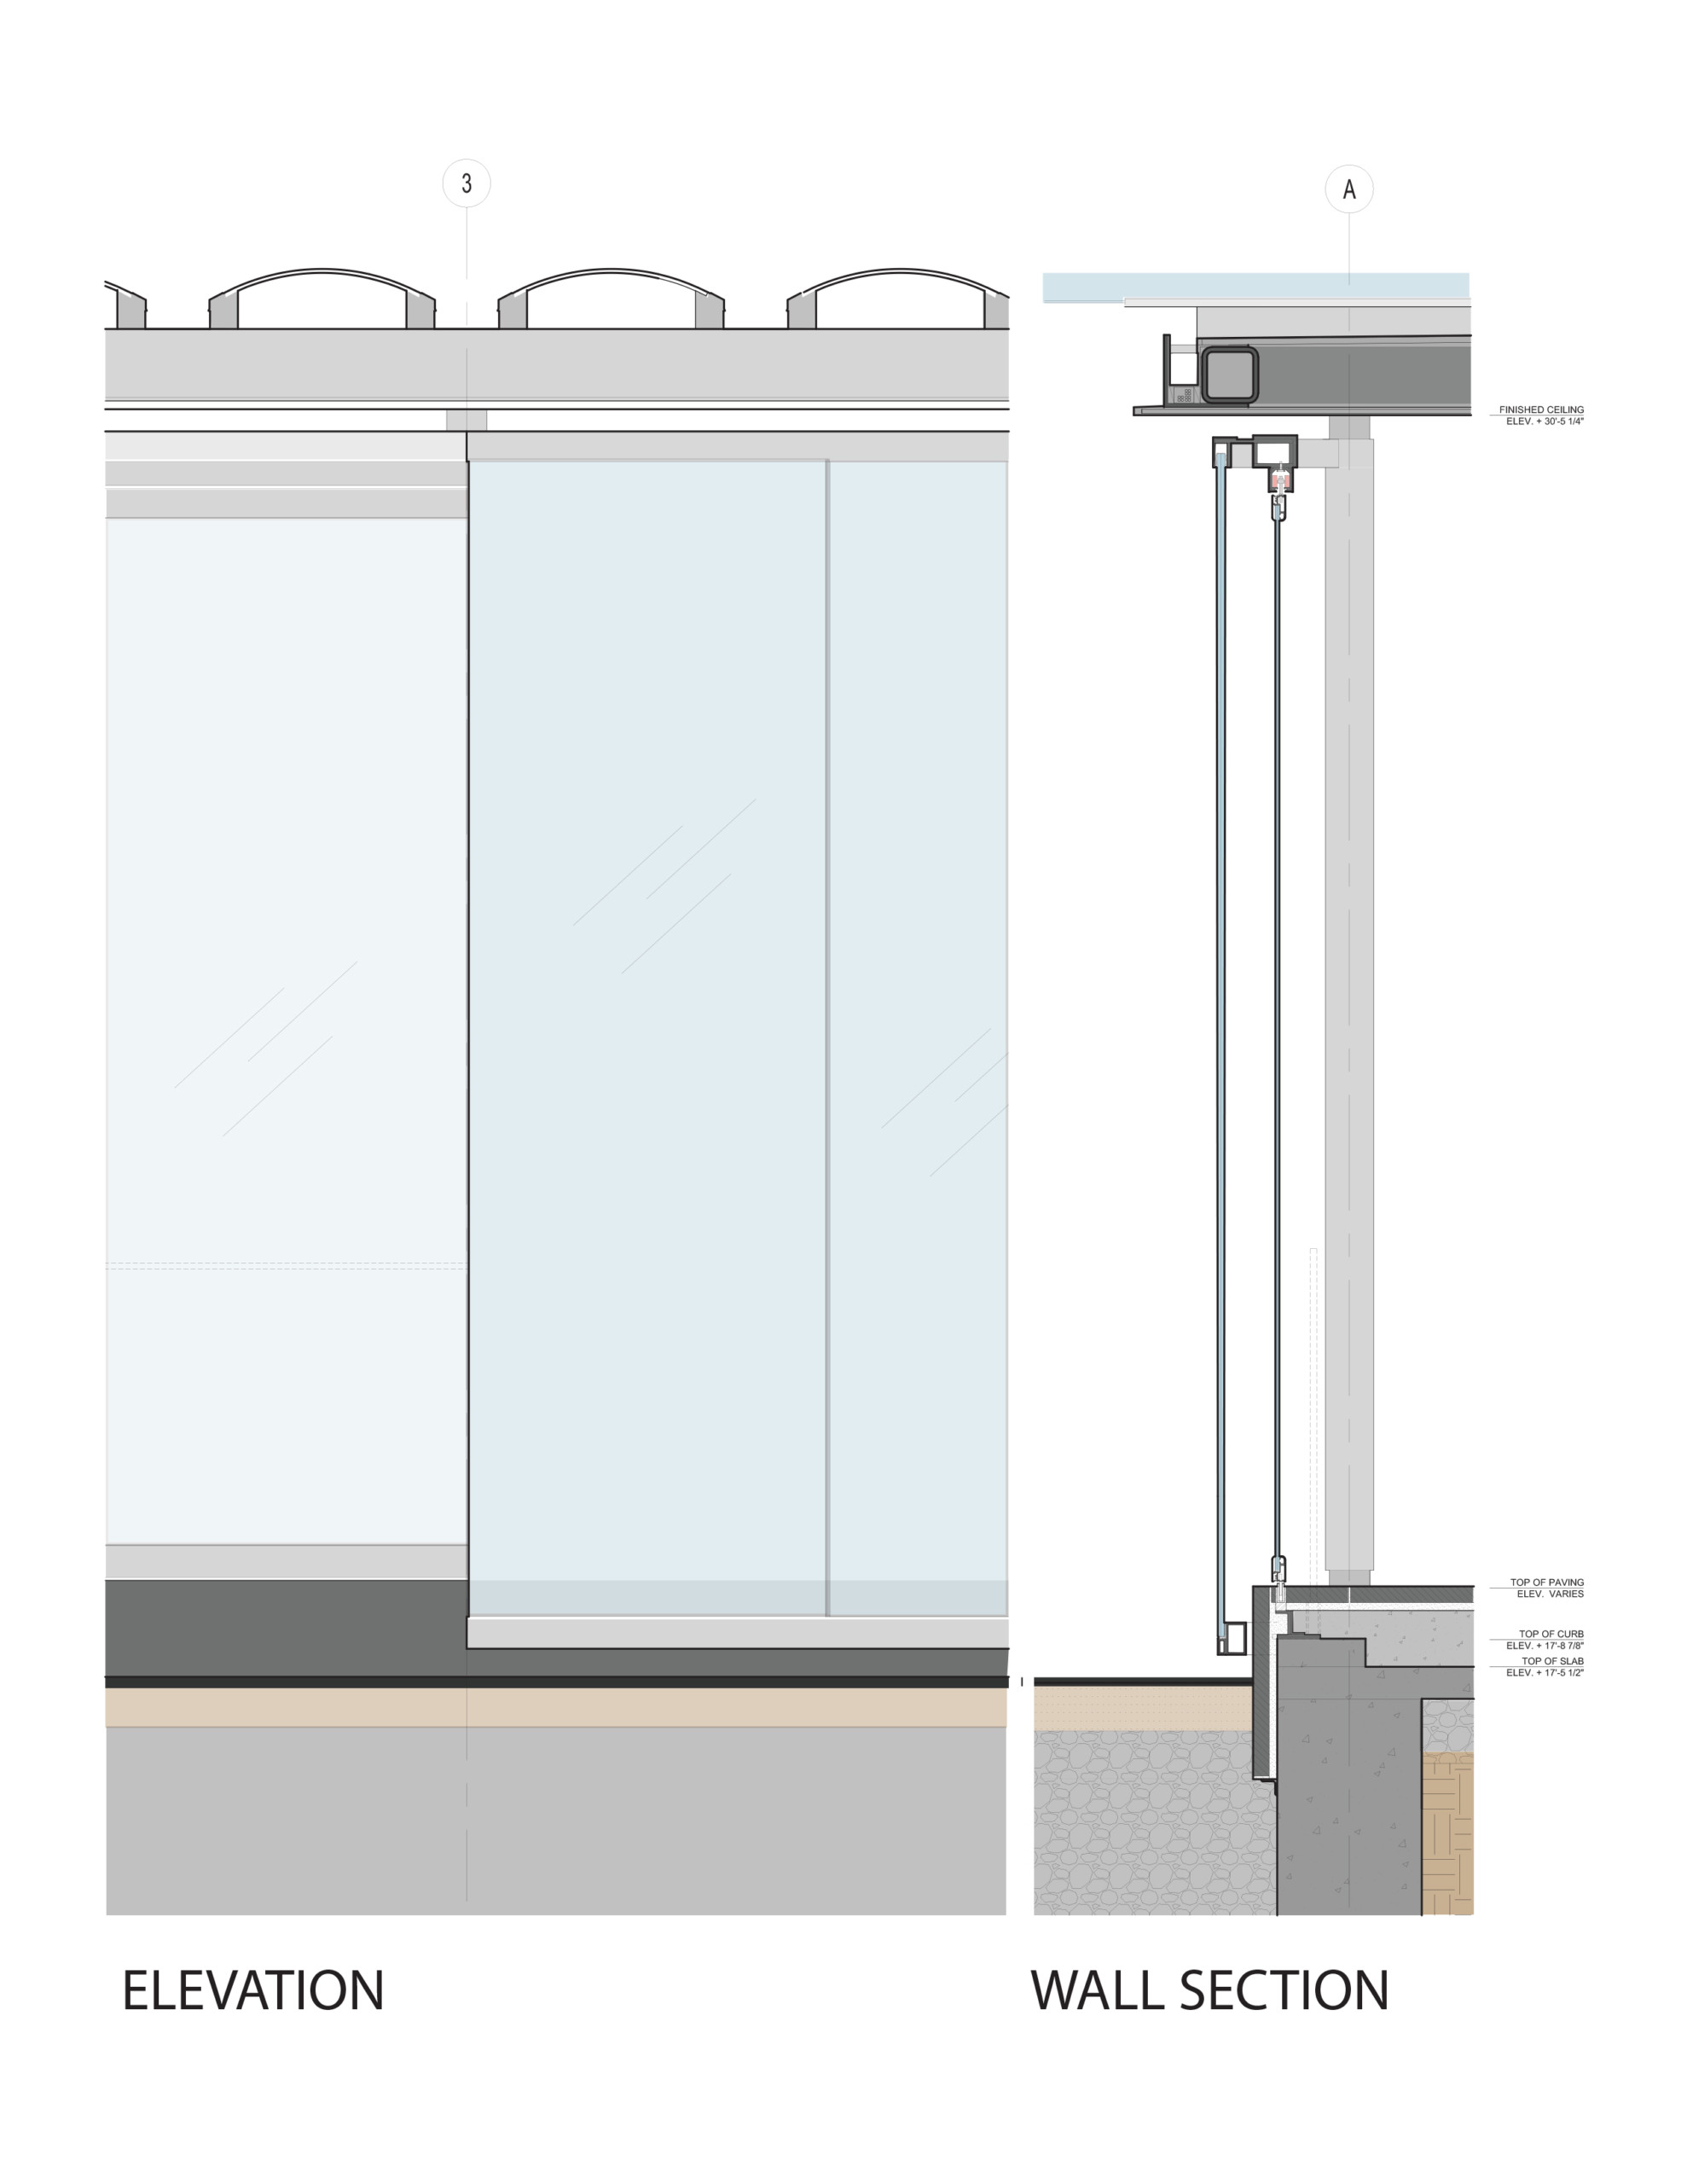 A detailed elevation and section of the pavillion's oversize glass doors.